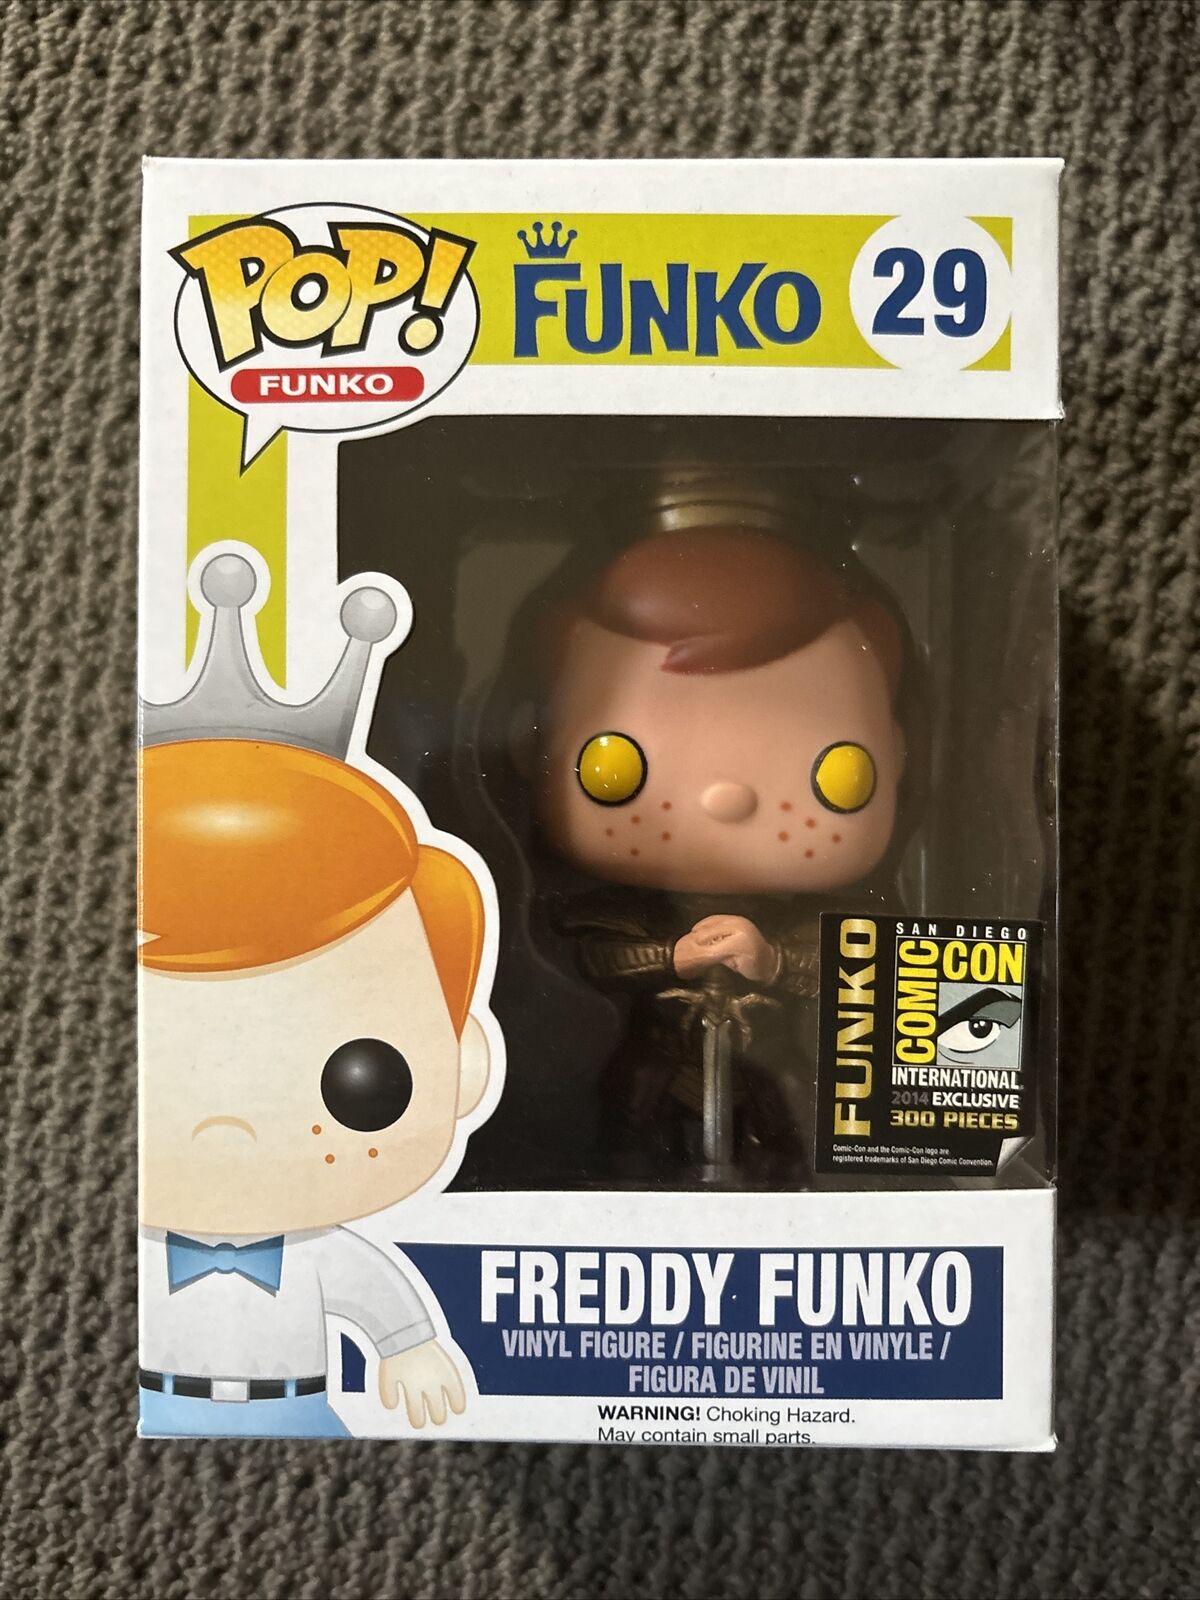 Freddy Funko Heimdall 29 SDCC Exclusive 1/300 pieces As Pictured With Protector